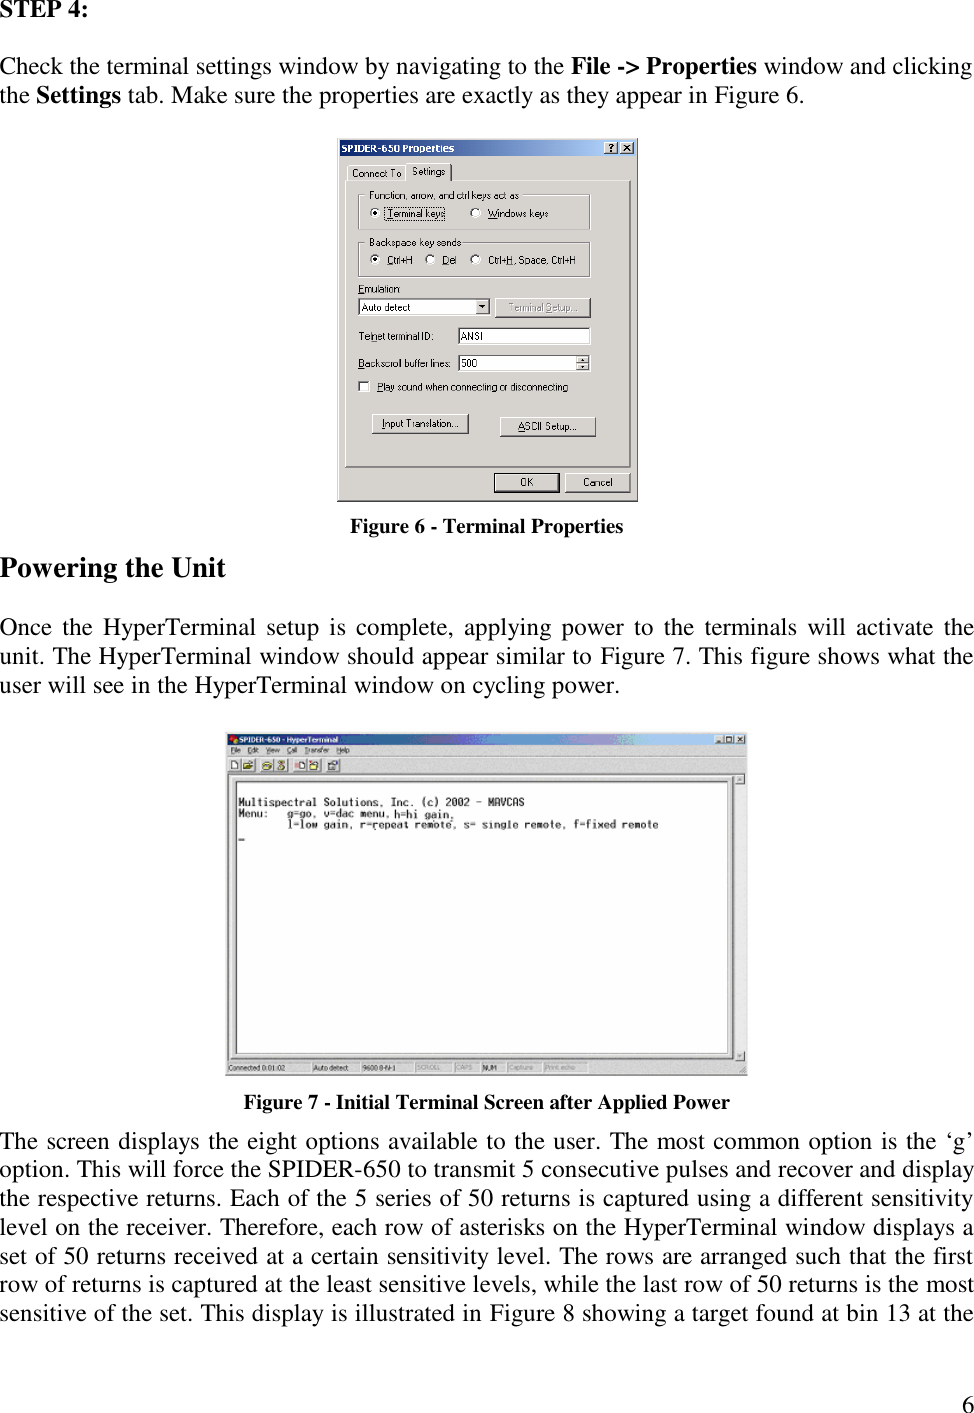  6 STEP 4:  Check the terminal settings window by navigating to the File -&gt; Properties window and clicking the Settings tab. Make sure the properties are exactly as they appear in Figure 6.   Figure 6 - Terminal Properties Powering the Unit  Once the HyperTerminal setup is complete, applying power to the terminals will activate the unit. The HyperTerminal window should appear similar to Figure 7. This figure shows what the user will see in the HyperTerminal window on cycling power.   Figure 7 - Initial Terminal Screen after Applied Power The screen displays the eight options available to the user. The most common option is the ‘g’ option. This will force the SPIDER-650 to transmit 5 consecutive pulses and recover and display the respective returns. Each of the 5 series of 50 returns is captured using a different sensitivity level on the receiver. Therefore, each row of asterisks on the HyperTerminal window displays a set of 50 returns received at a certain sensitivity level. The rows are arranged such that the first row of returns is captured at the least sensitive levels, while the last row of 50 returns is the most sensitive of the set. This display is illustrated in Figure 8 showing a target found at bin 13 at the 